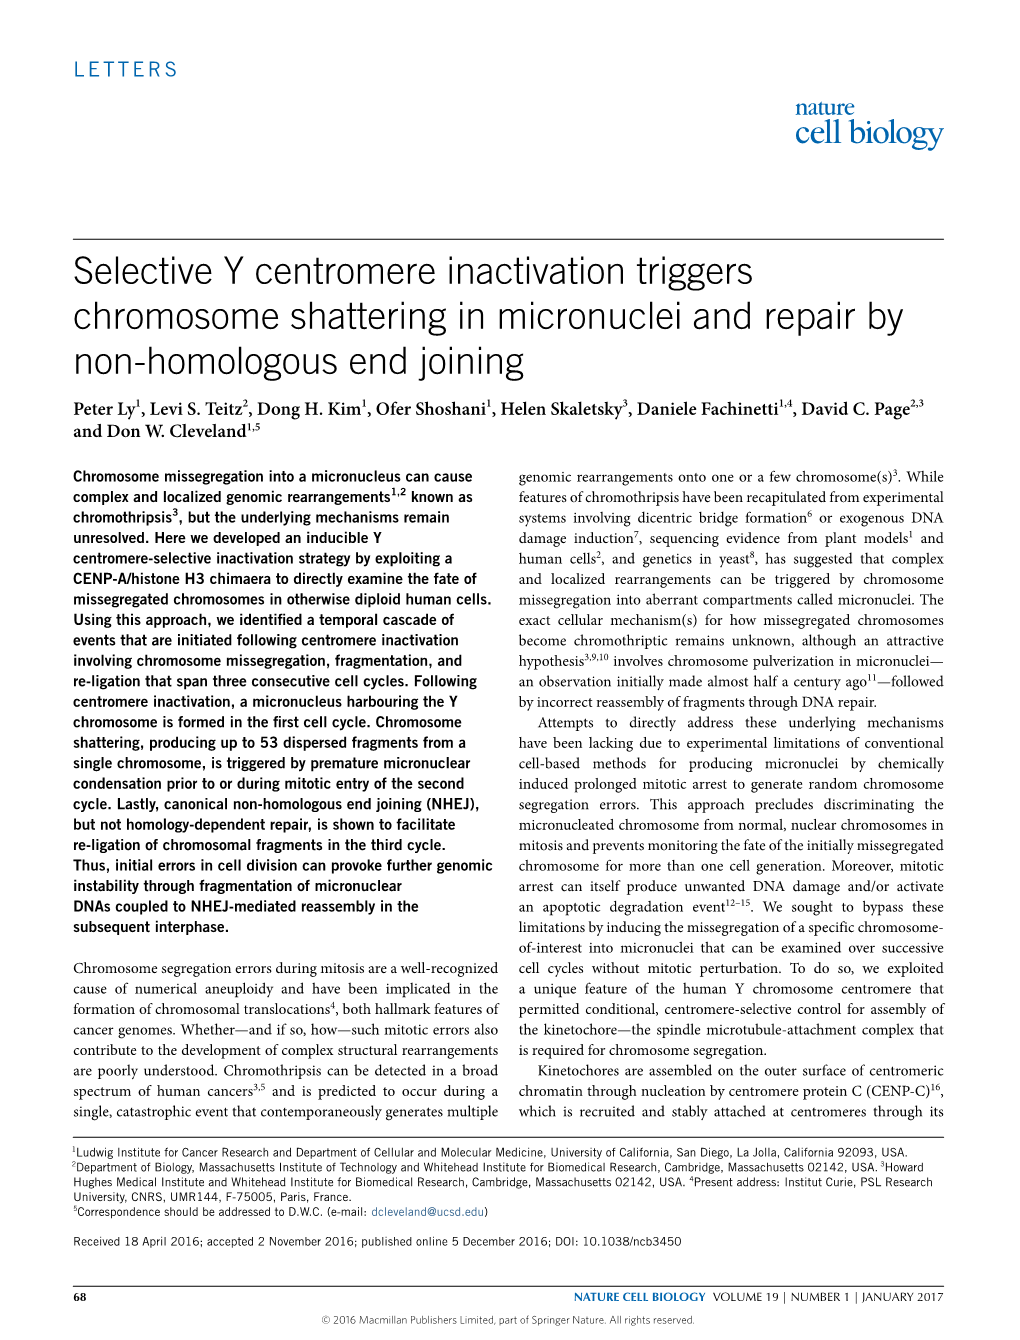 Selective Y Centromere Inactivation Triggers Chromosome Shattering in Micronuclei and Repair by Non-Homologous End Joining